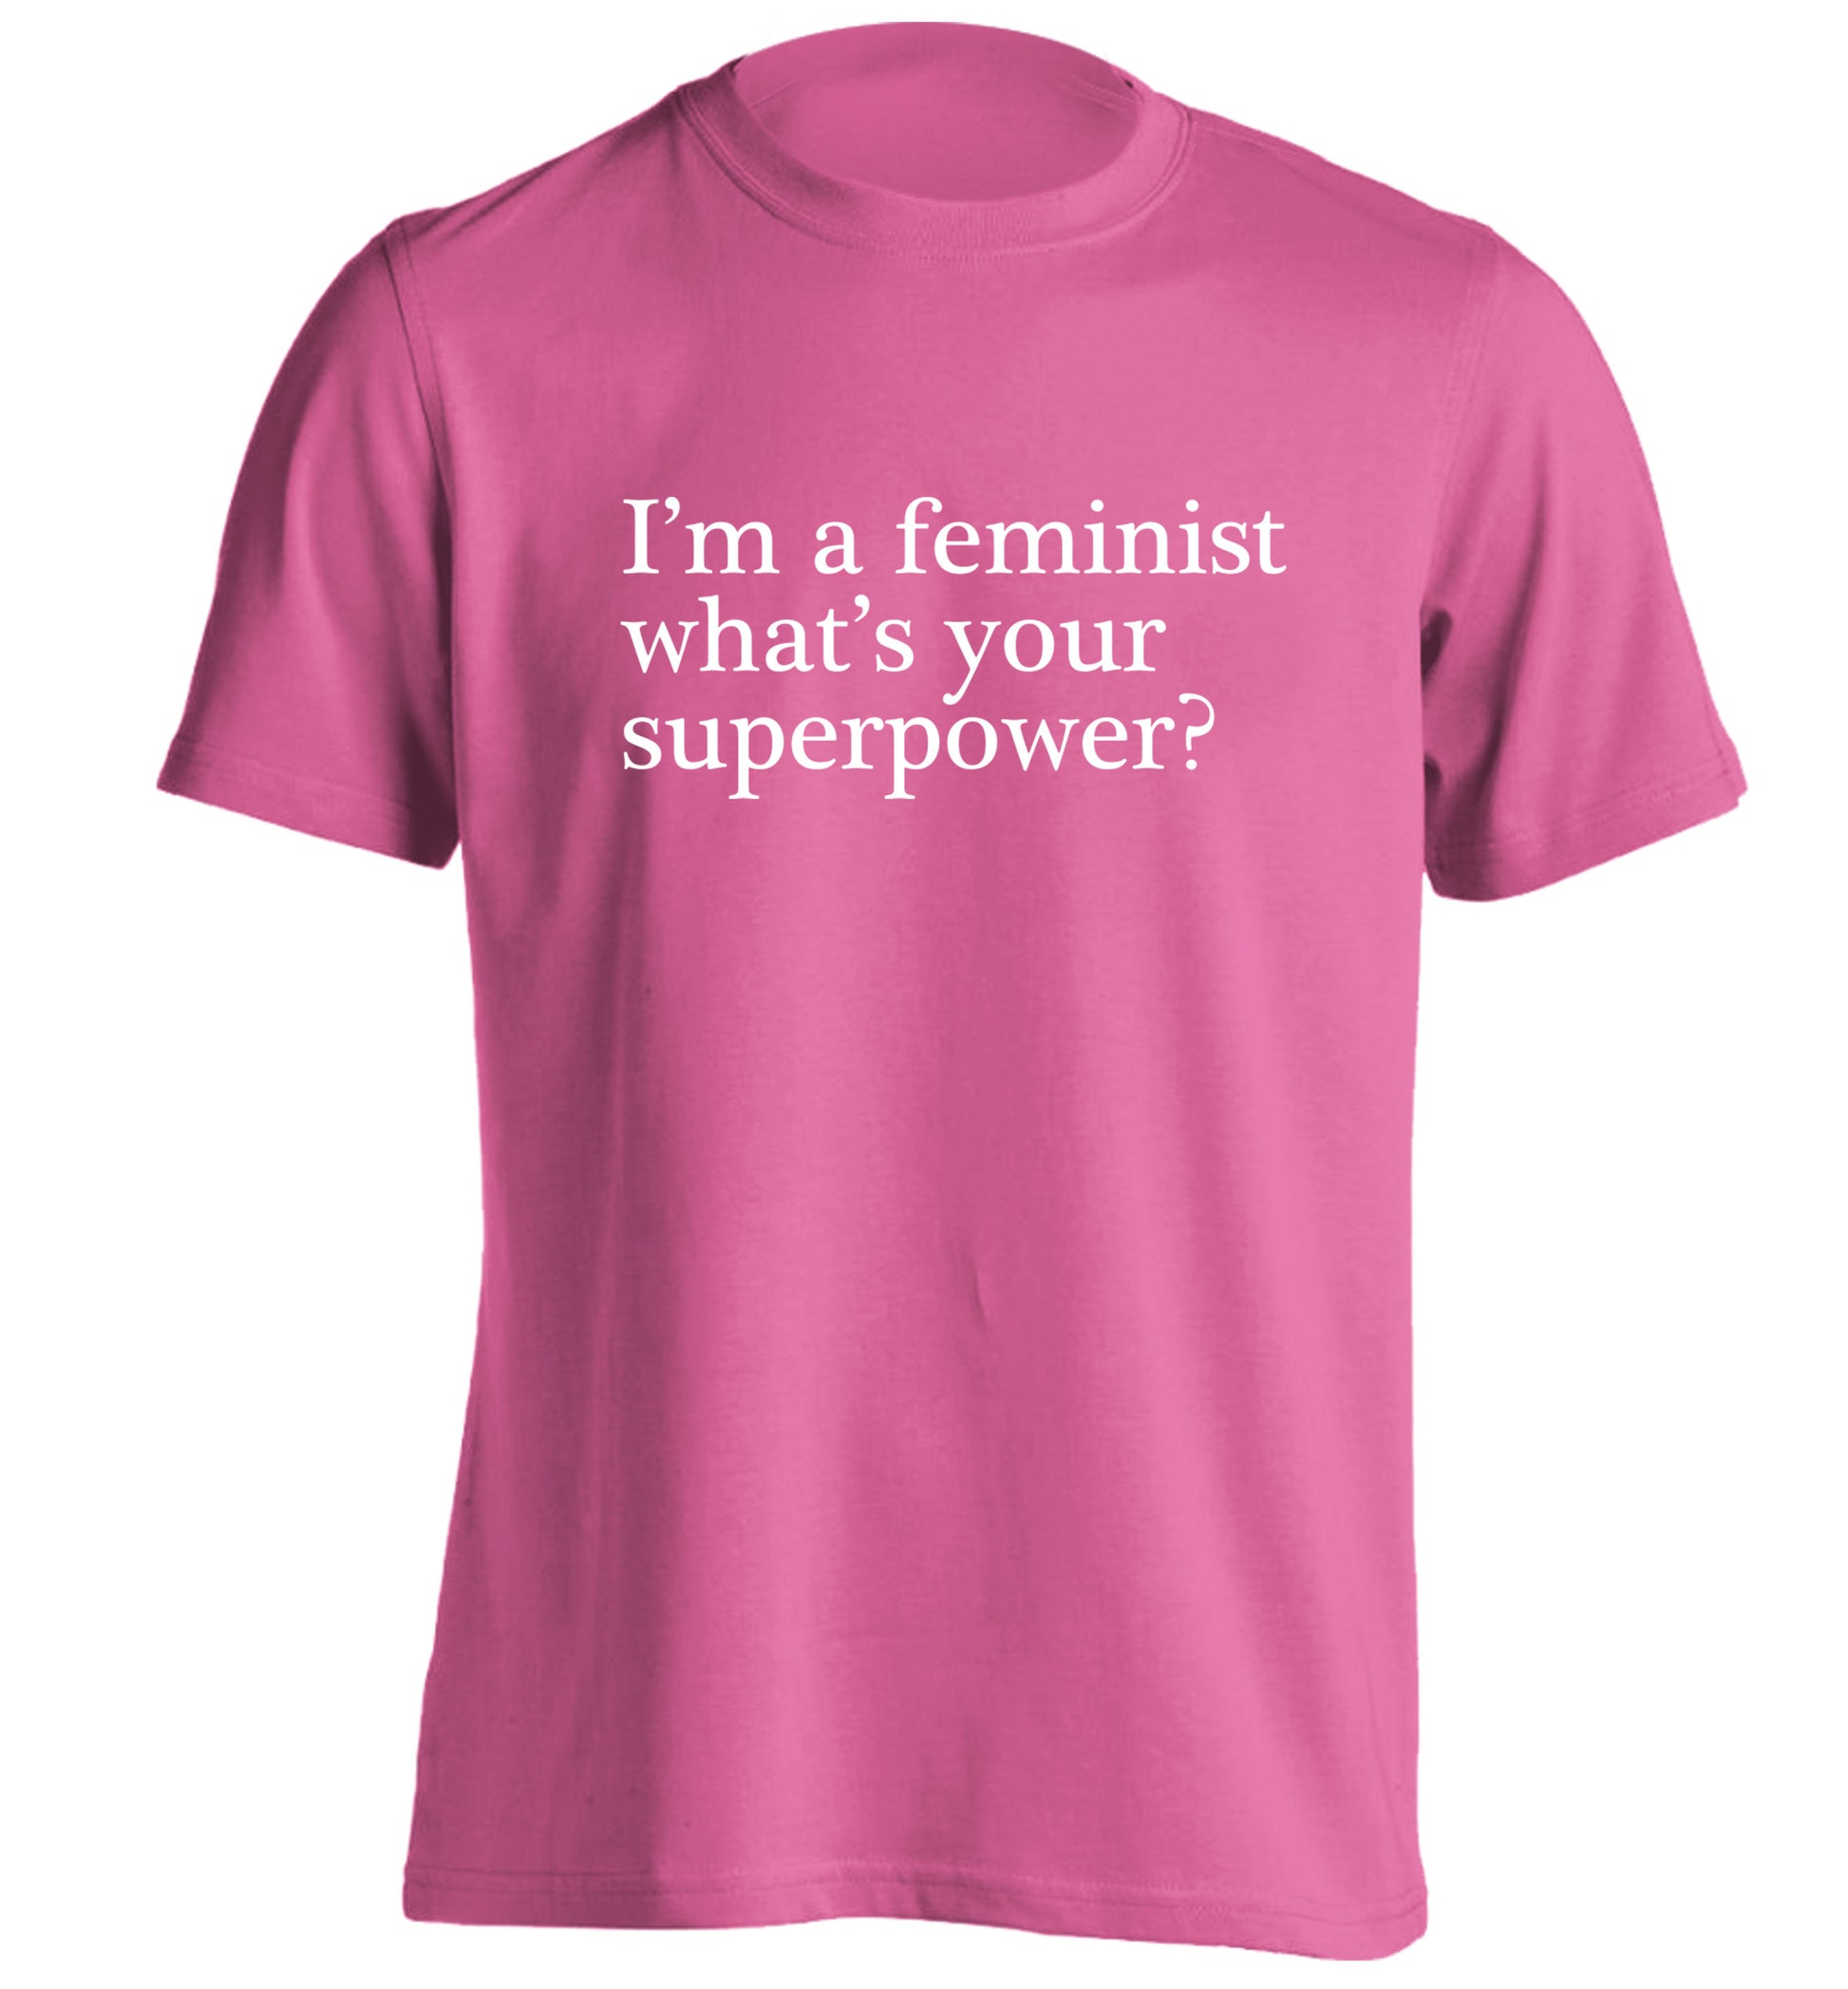 I'm a feminist what's your superpower? adults unisex pink Tshirt 2XL